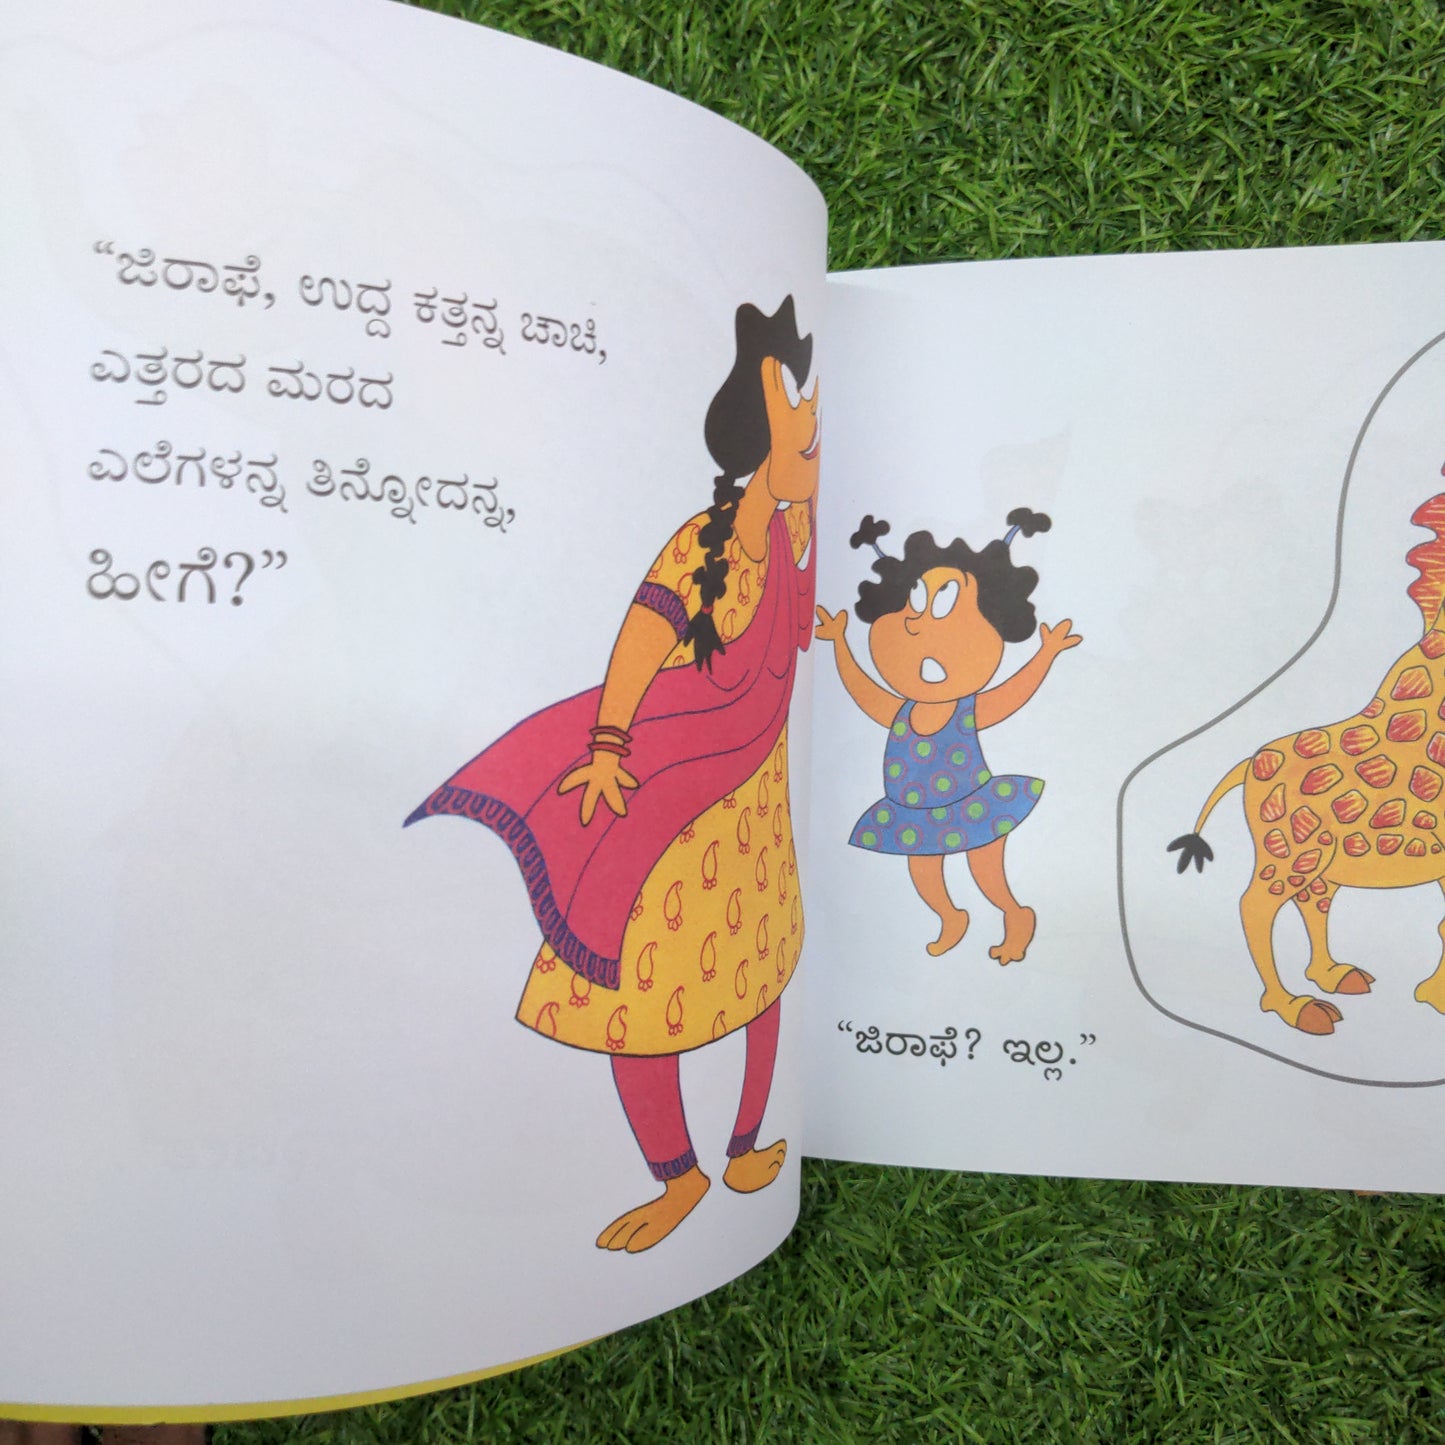 WHAT DID YOU SEE? - Kannada